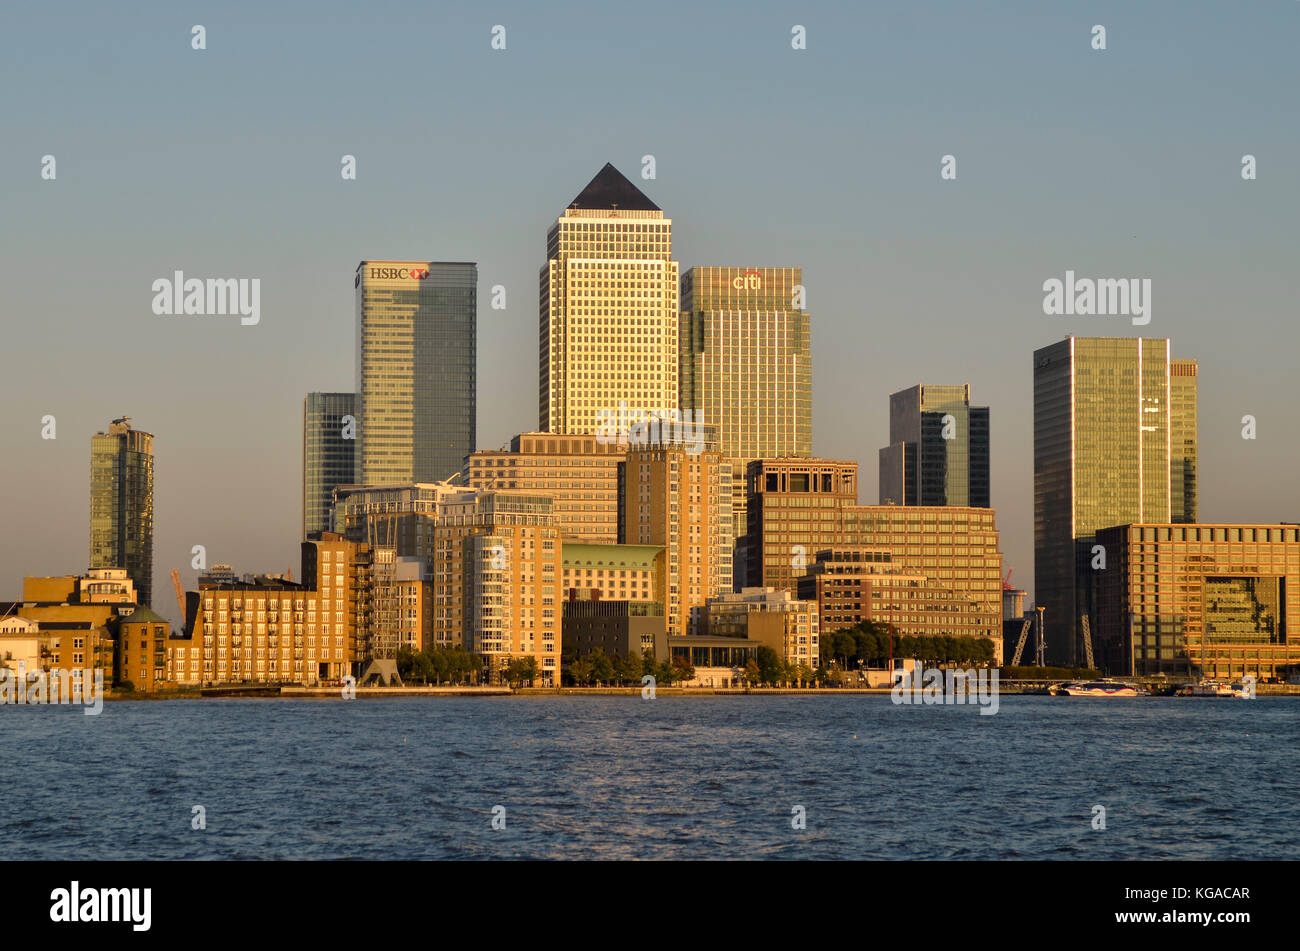 Canary Wharf, London, UK. HSBC, No.1 Canada Square, Citi and Credit Suisse head office buildings all visible. Stock Photo